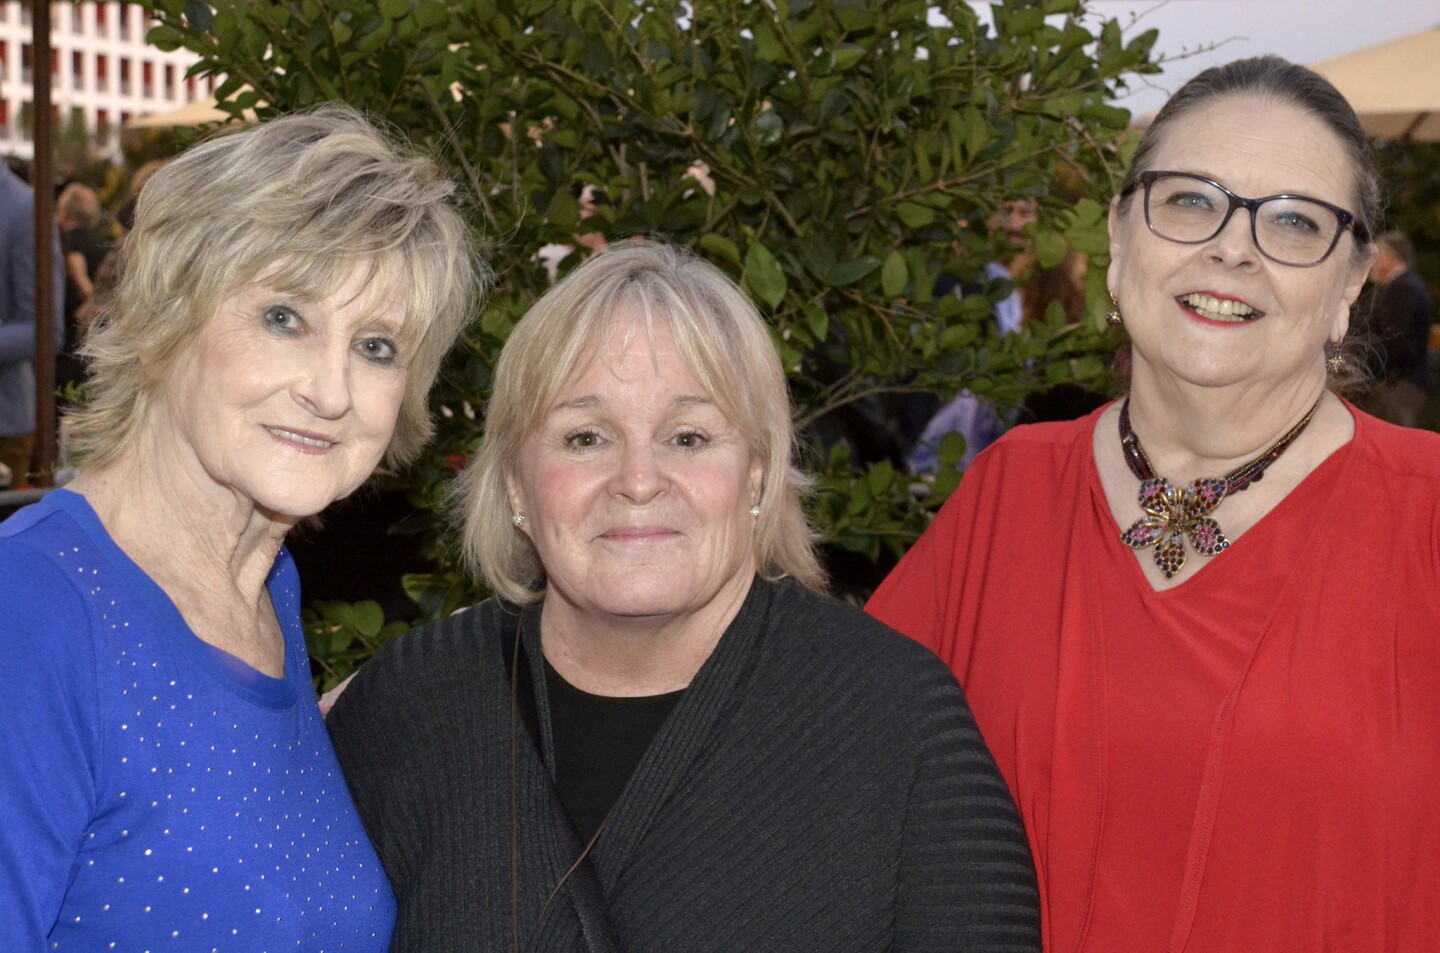 Pat Smola, from left, and Laurie Bleick of the Family Service Agency, welcomed special guest Joan “J.P.” O’Connor, the daughter of Mary Alice O’Connor, to last week’s “Imagine a City” gala.